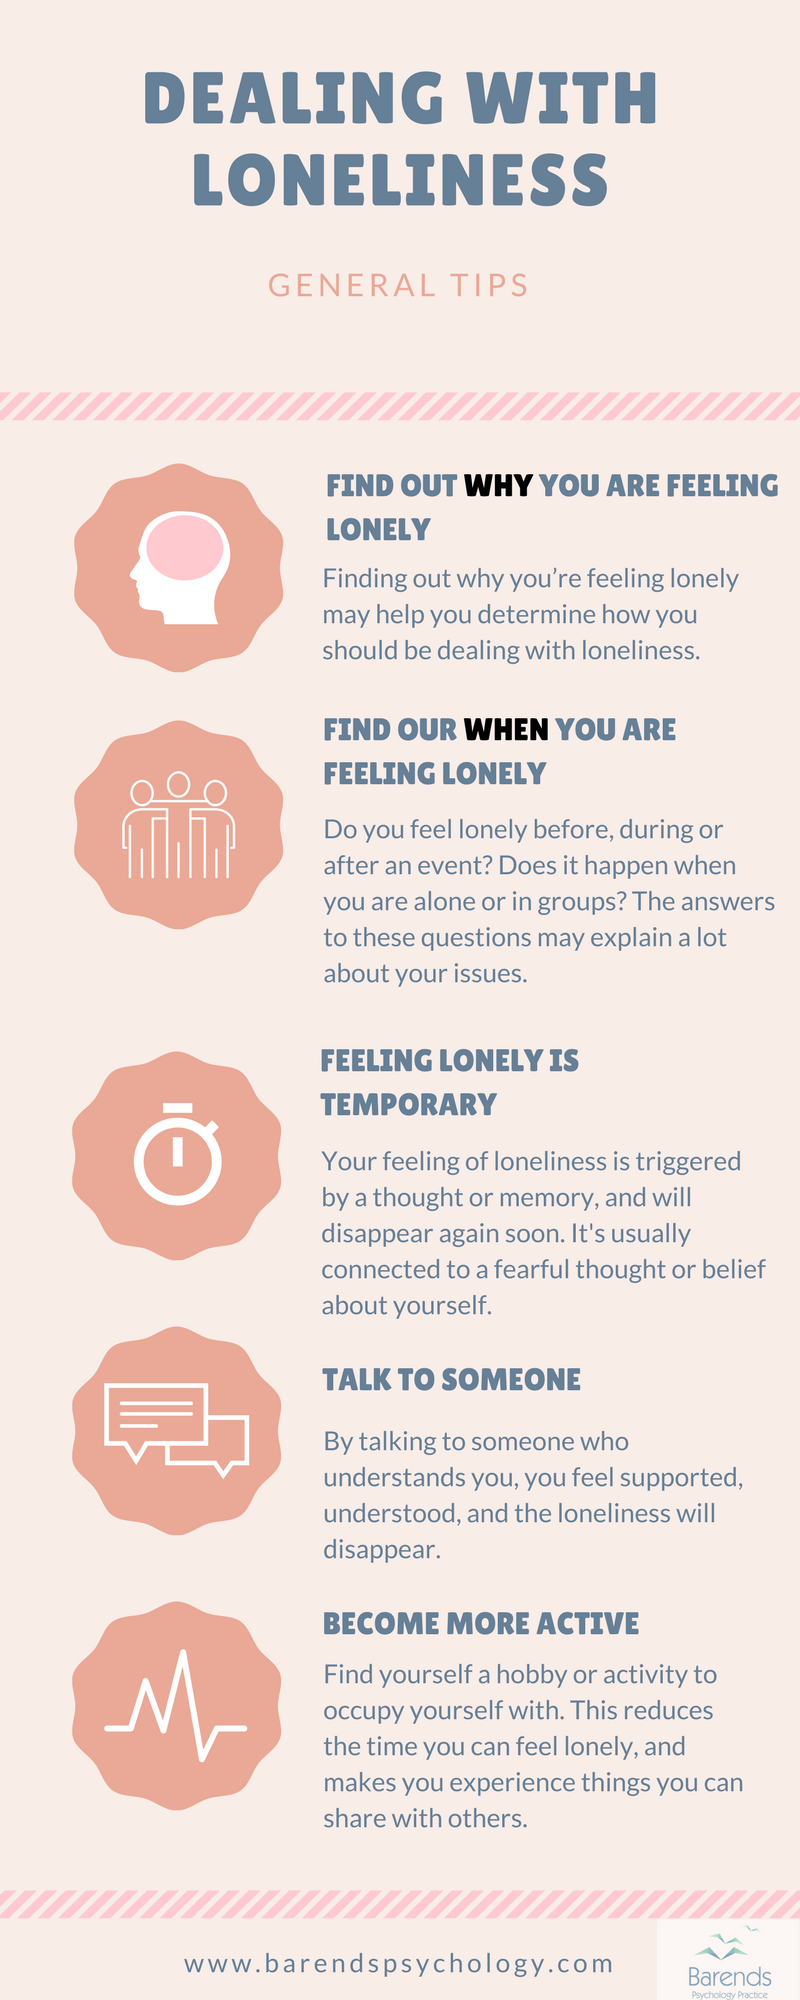 I Feel Lonely: What To Do When You're Feeling Alone